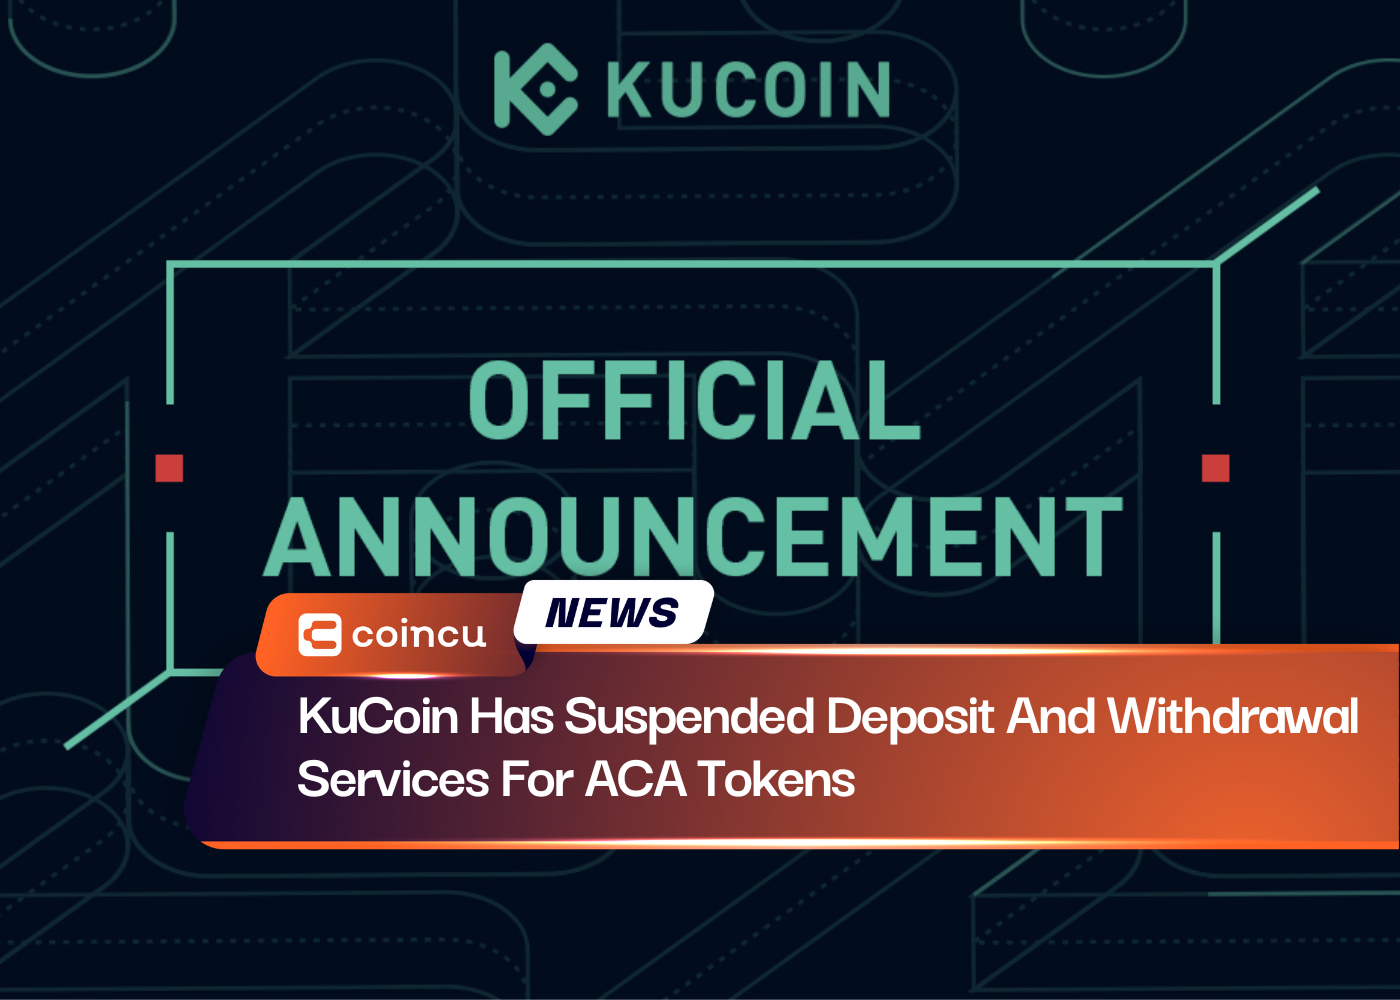 KuCoin Has Suspended Deposit And Withdrawal Services For ACA Tokens